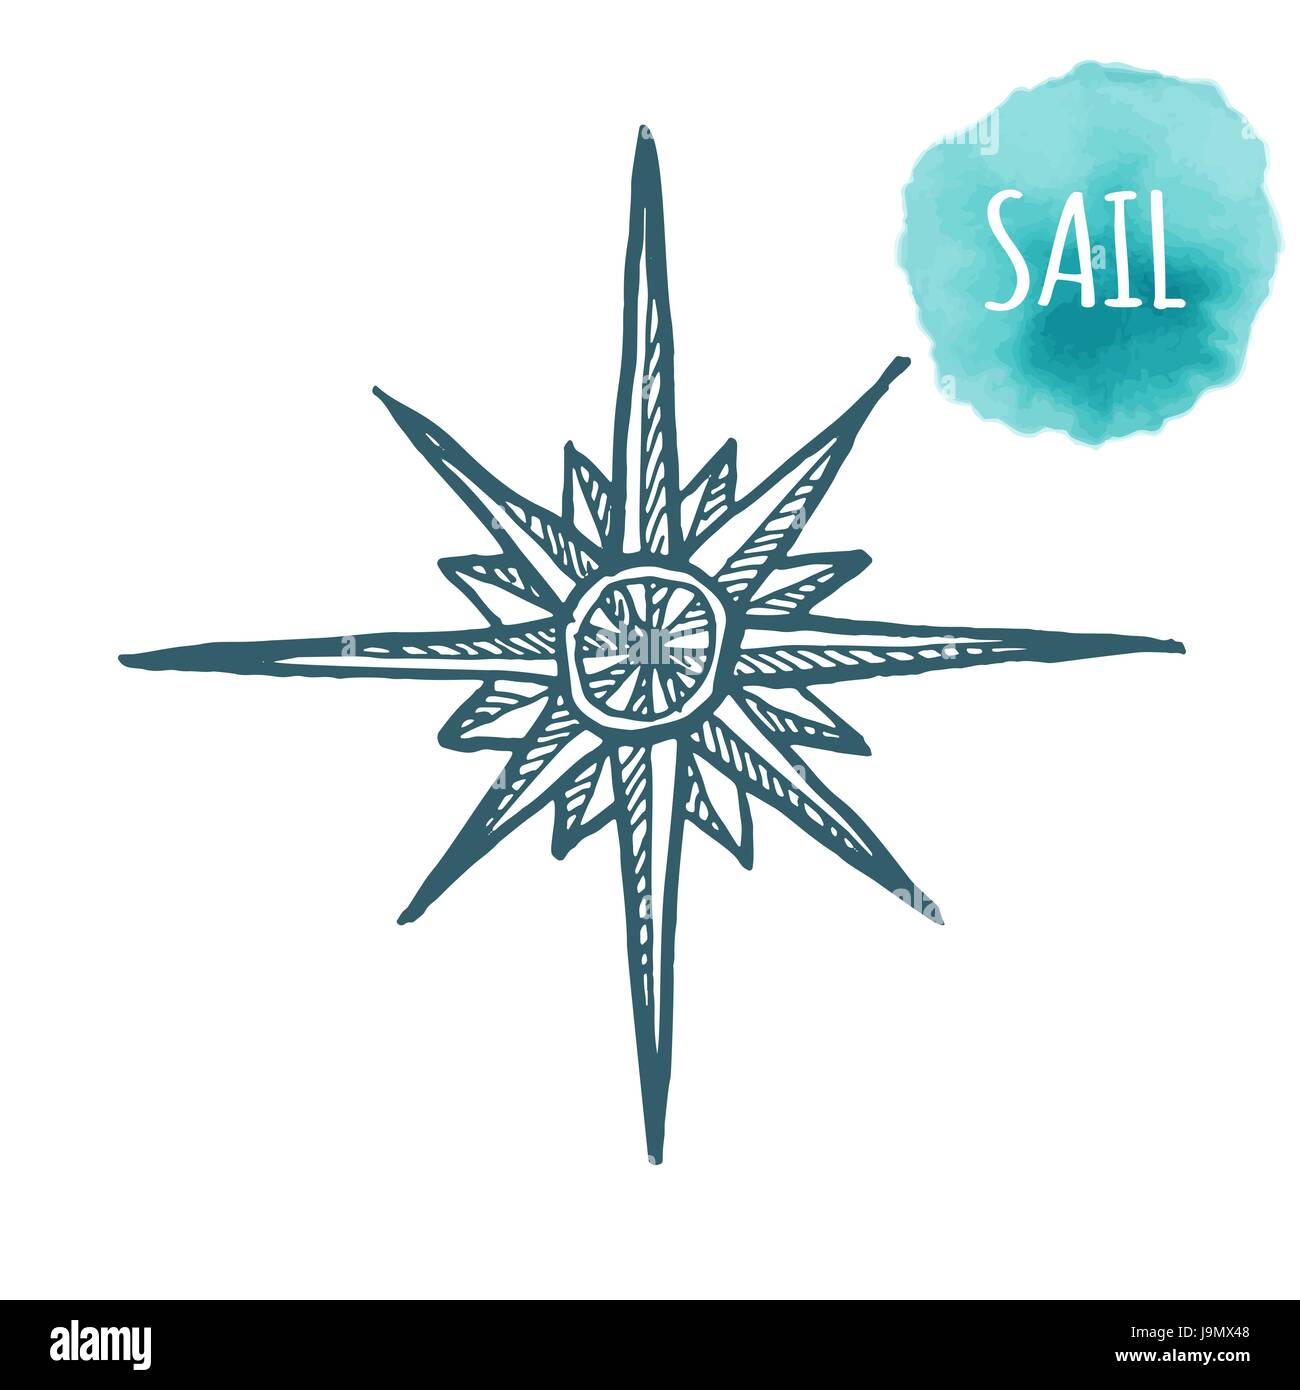 Nautical marine wind rose, compass icon for travel, navigation design. Hand drawn illustration for tattoo, print. Vector sketch in line art style with engraved elements isolated on vintage background. Stock Vector